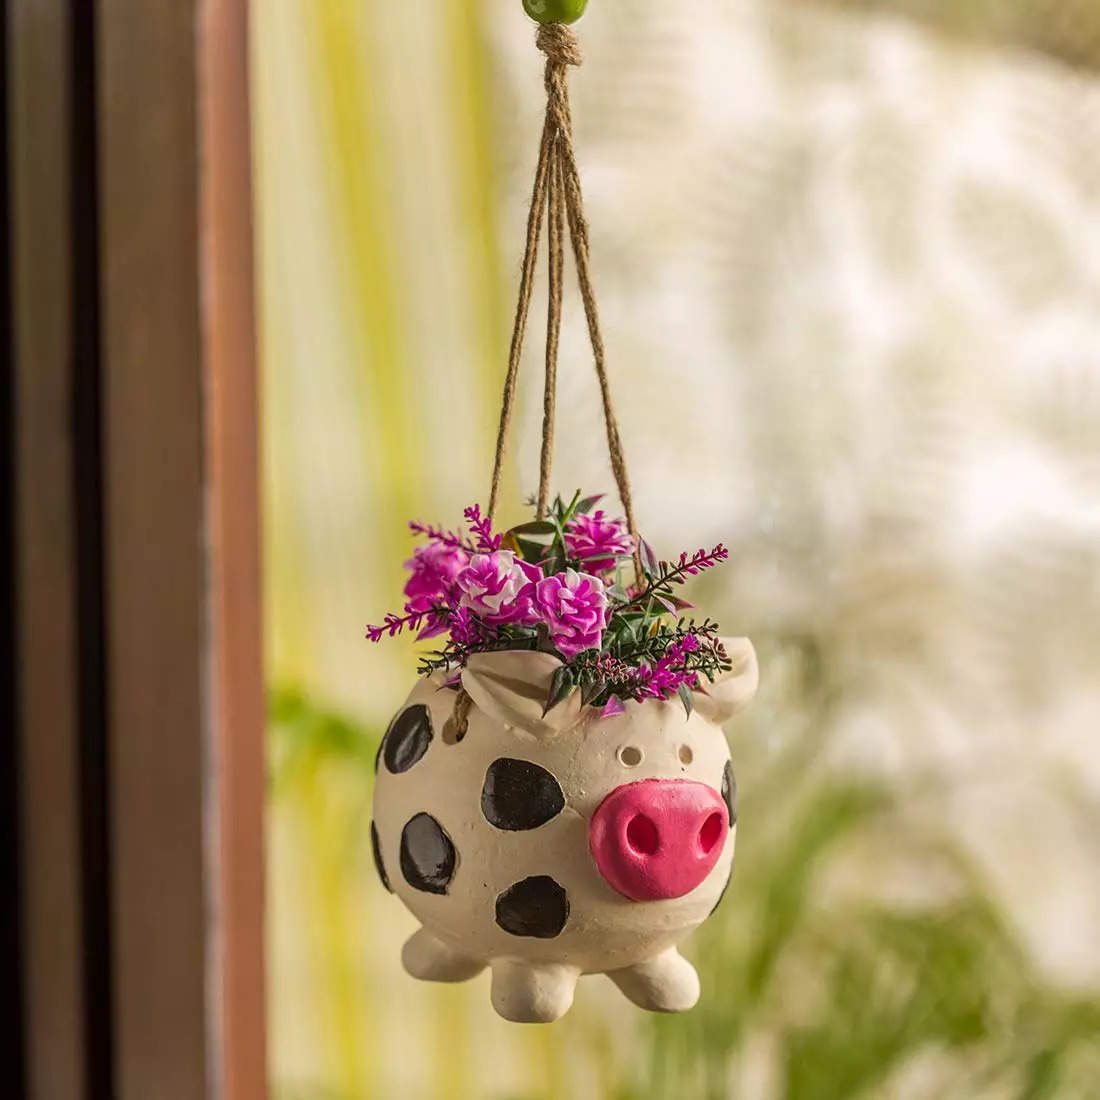 10 Stylish Hanging Planters to Add a Touch of Green to Your Home:Image